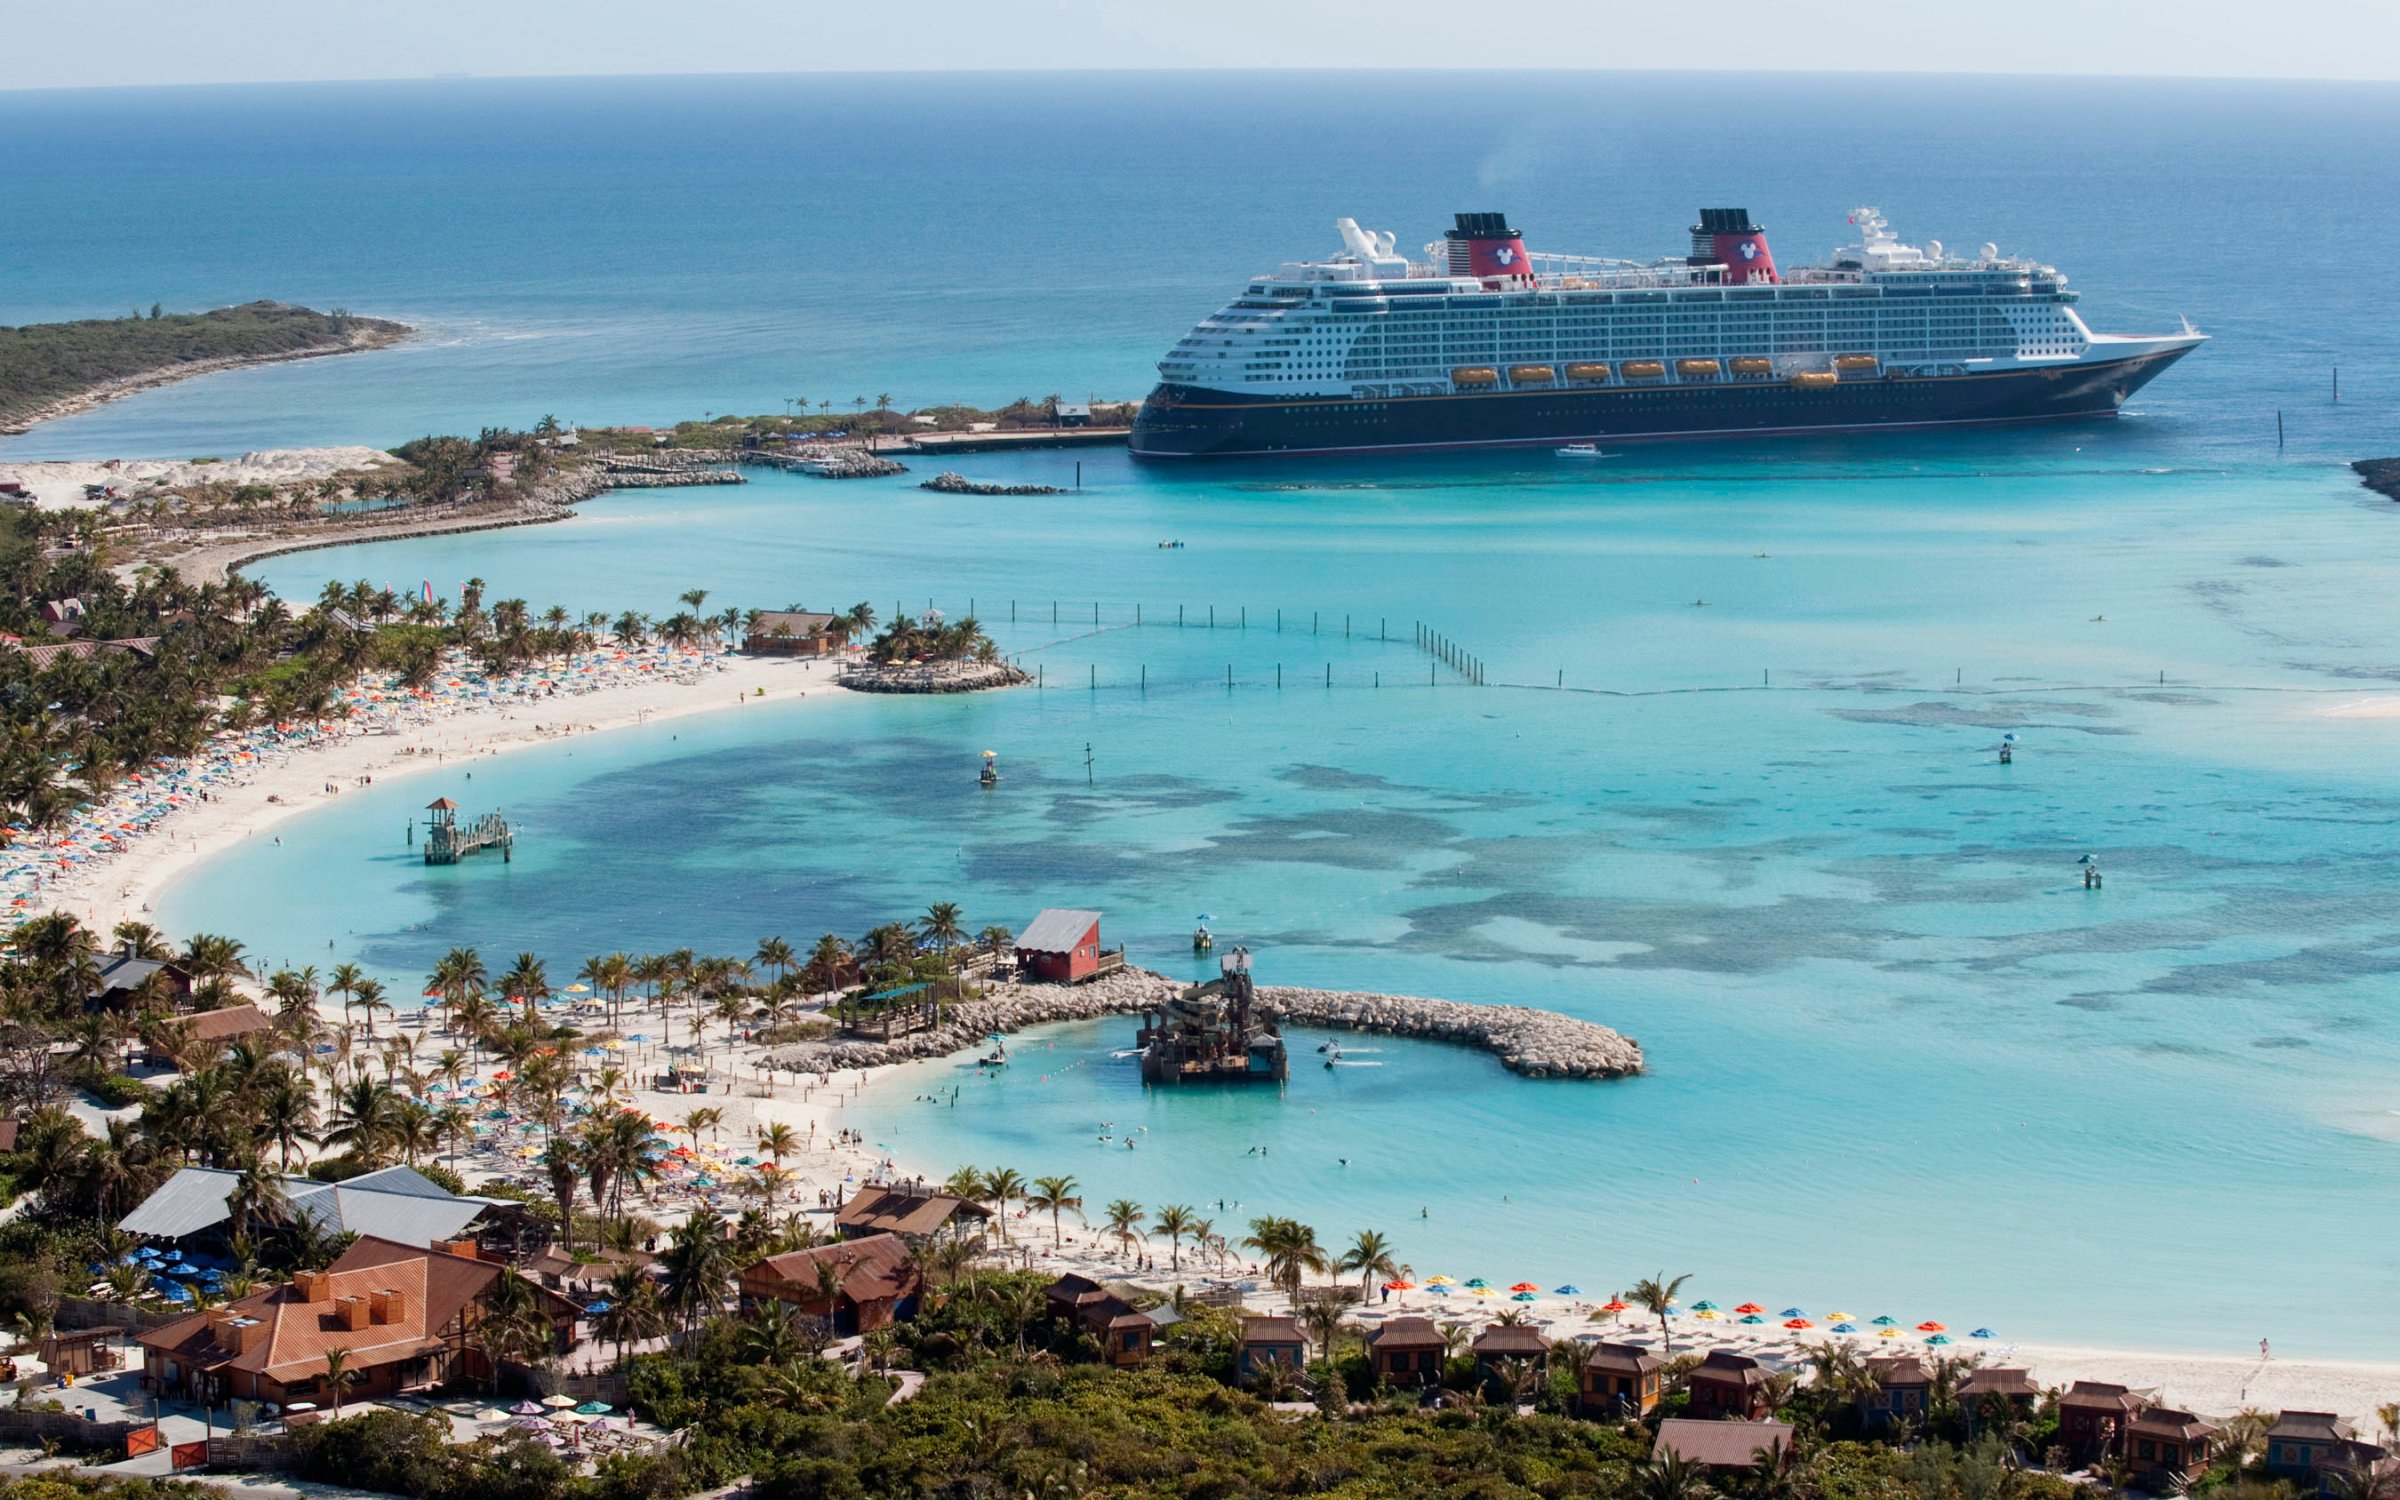 The Disney Dream docks at Castaway Cay, Disney's private island in the tropical waters of the Bahamas.